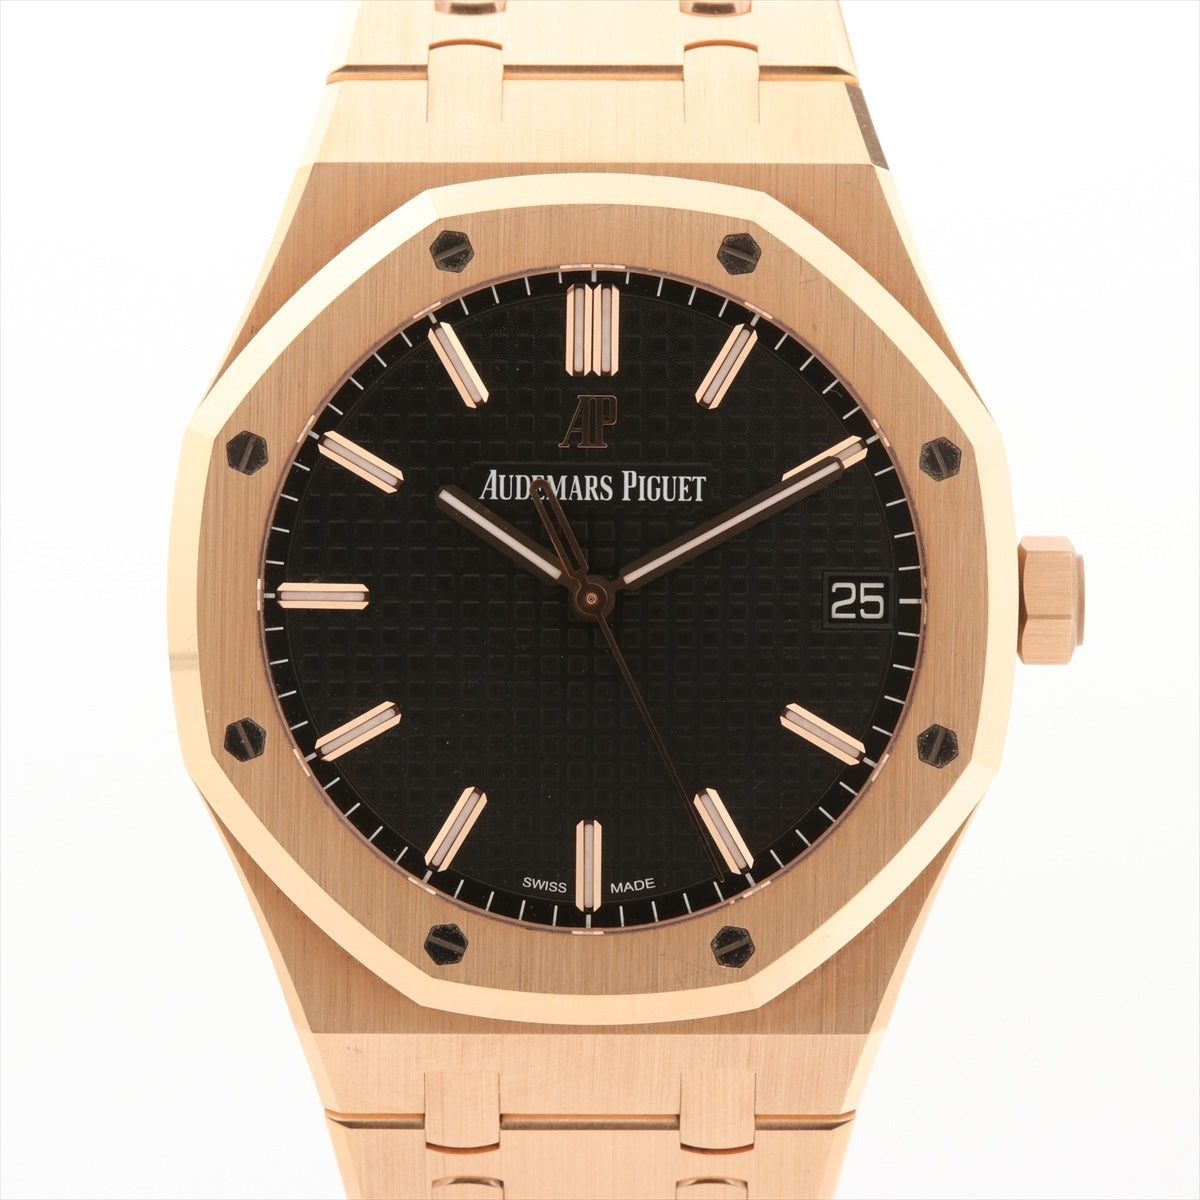 Audemars Piguet Royal Oak 15500OR.OO.1220OR.01 PG AT Black-Face Extra Link 1 Comes with a separate model box